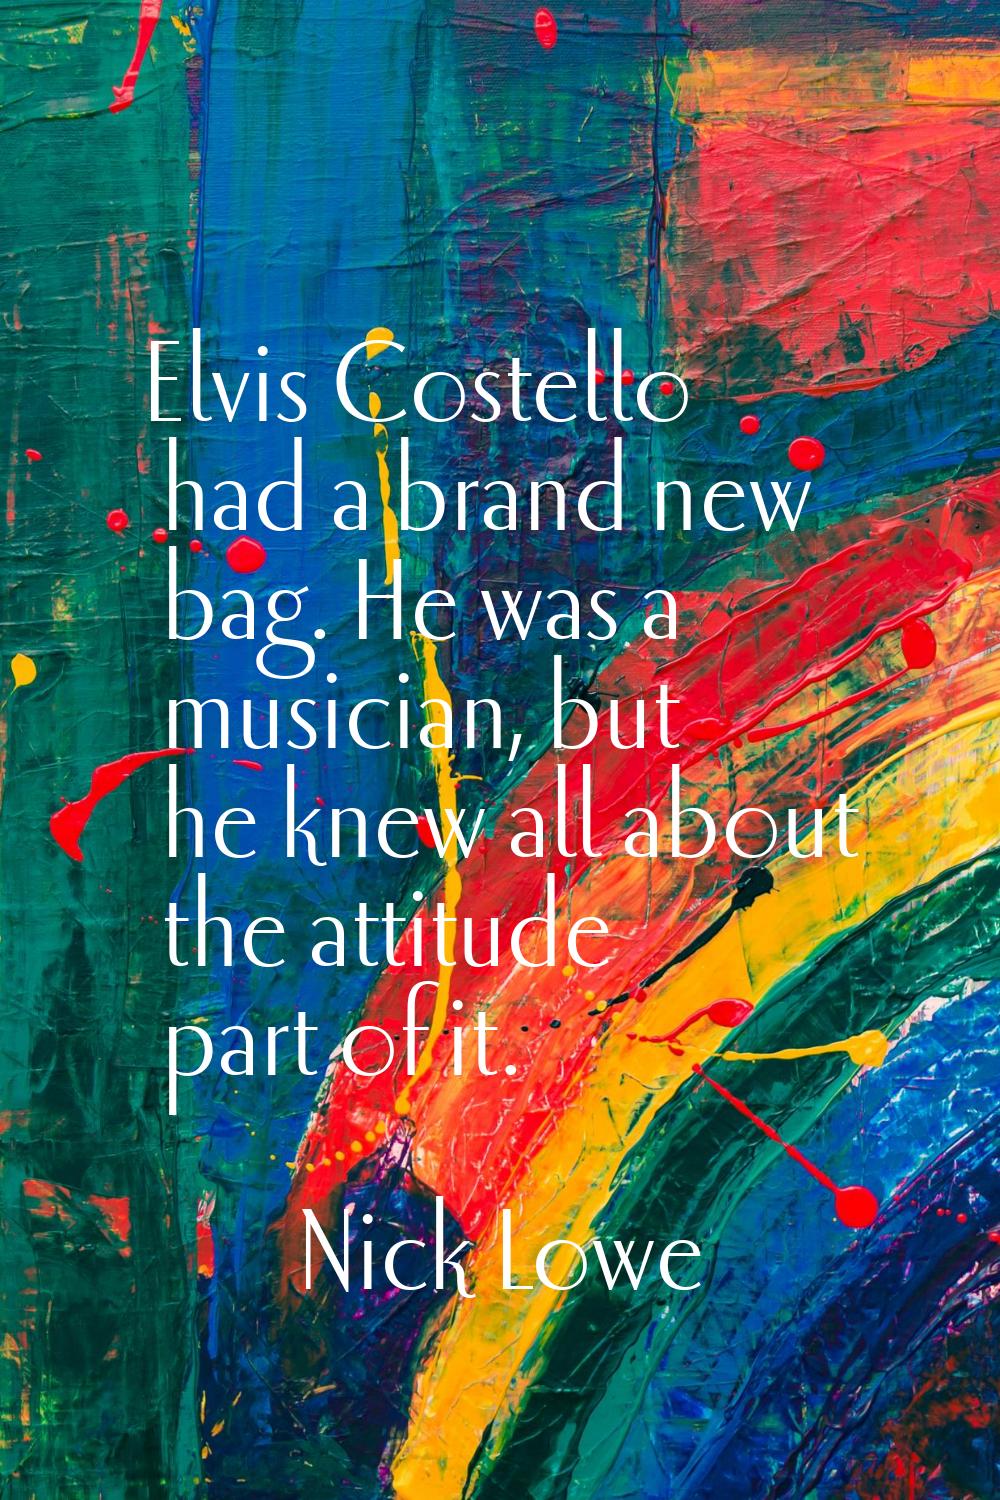 Elvis Costello had a brand new bag. He was a musician, but he knew all about the attitude part of i